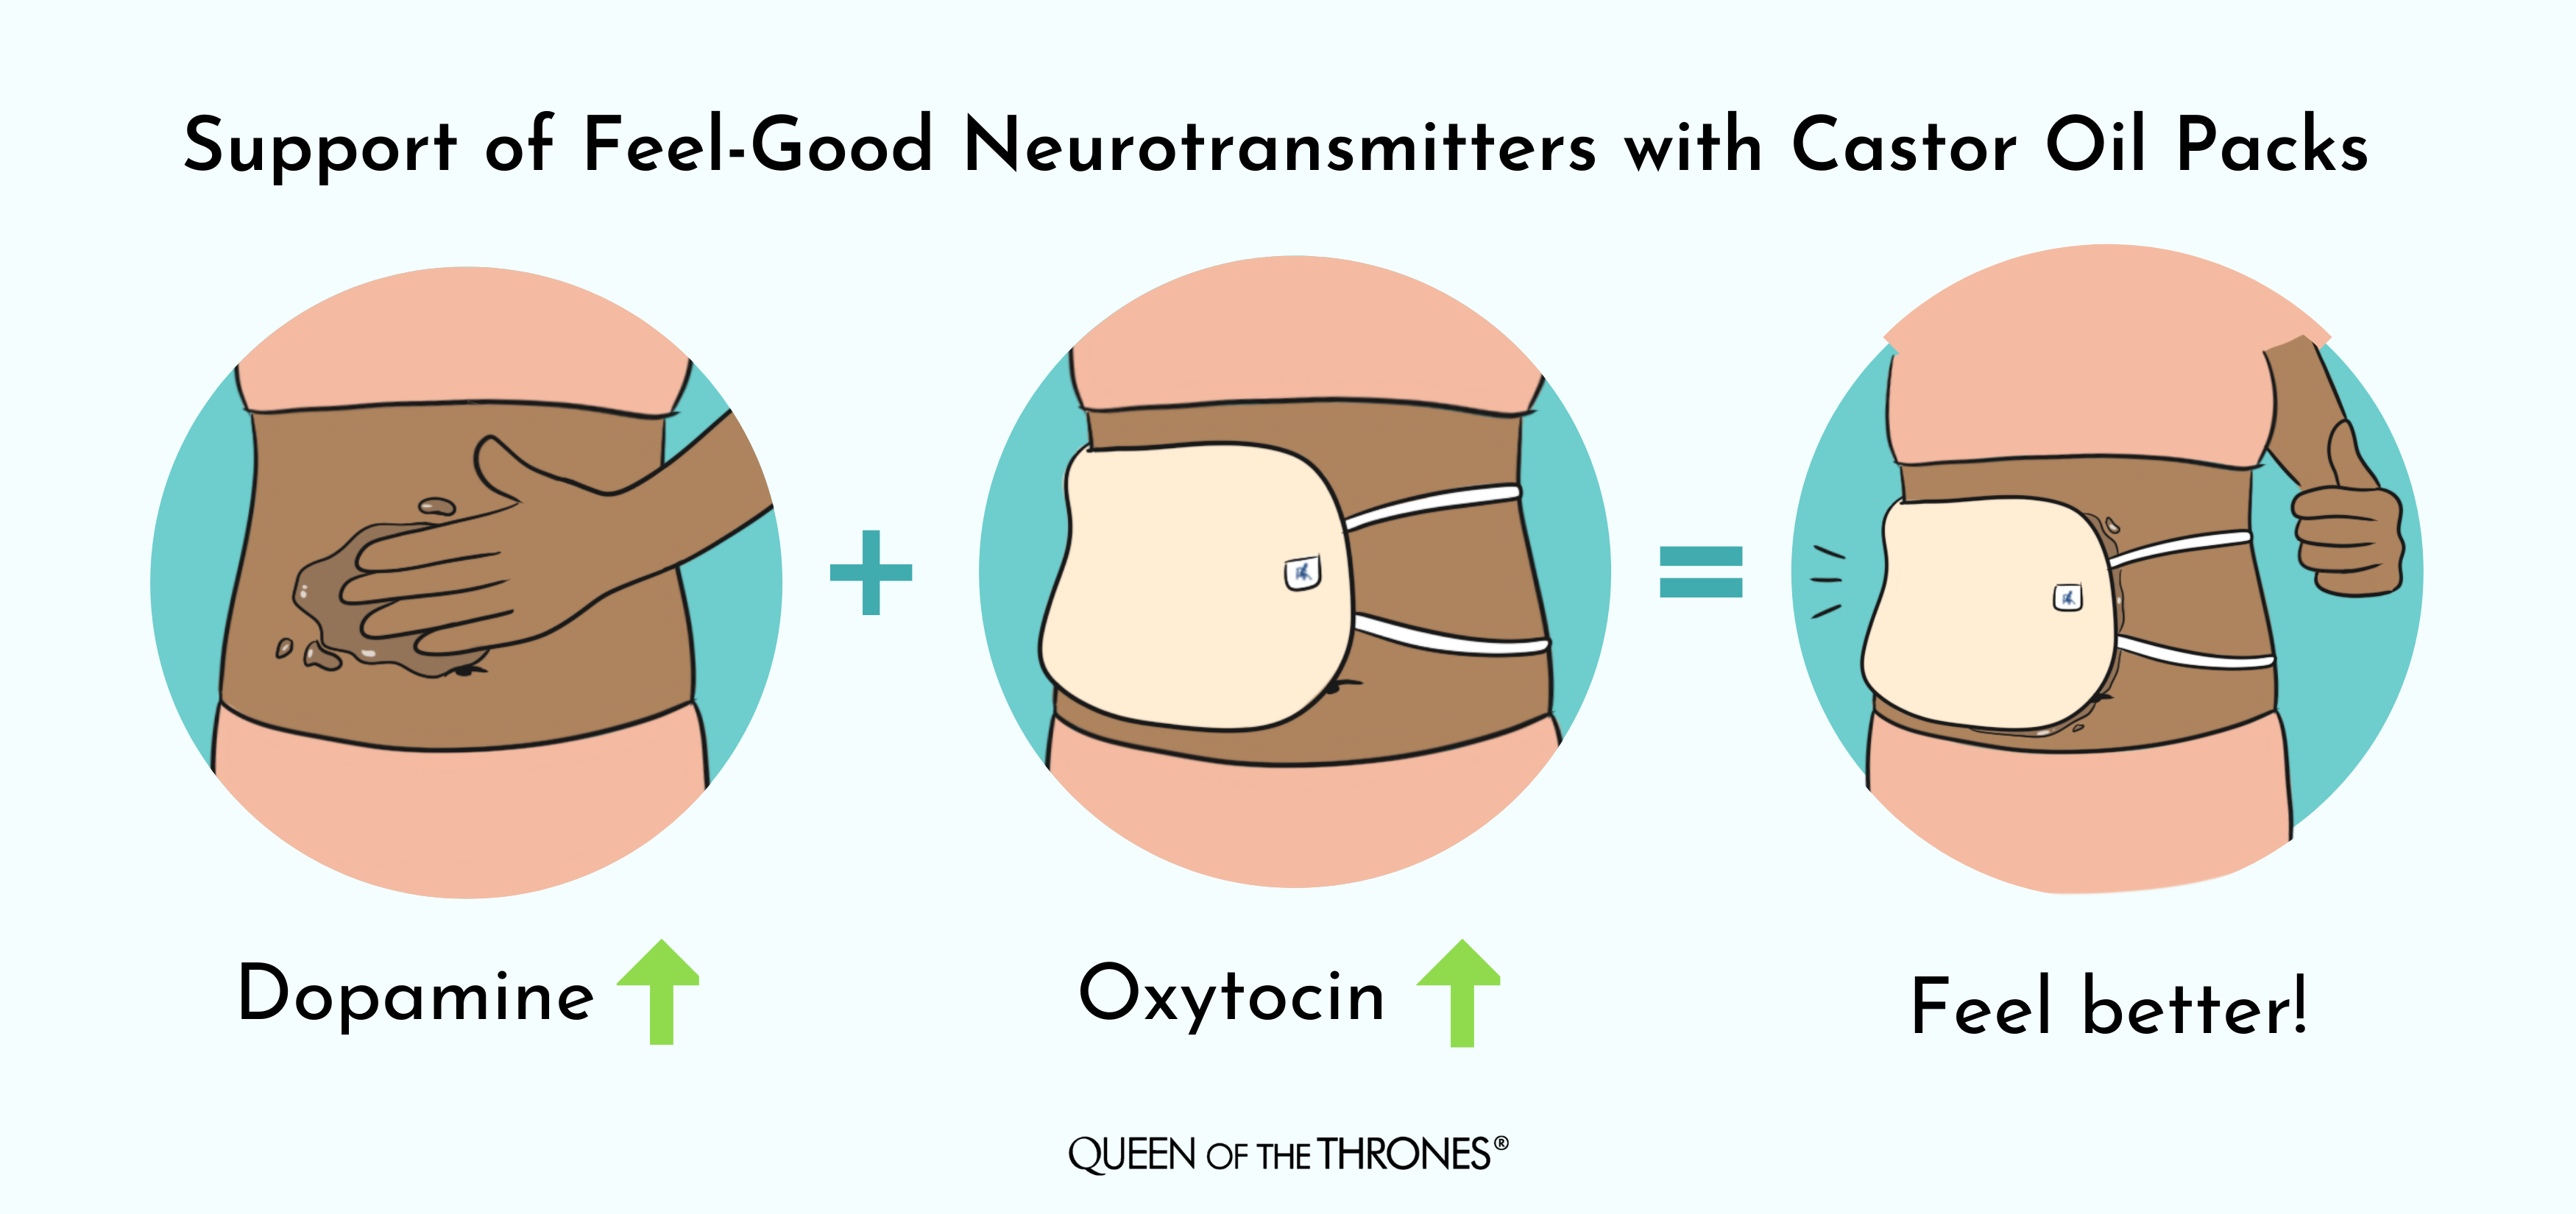 Castor Oil Packs neurotransmitters by Queen of the Thrones